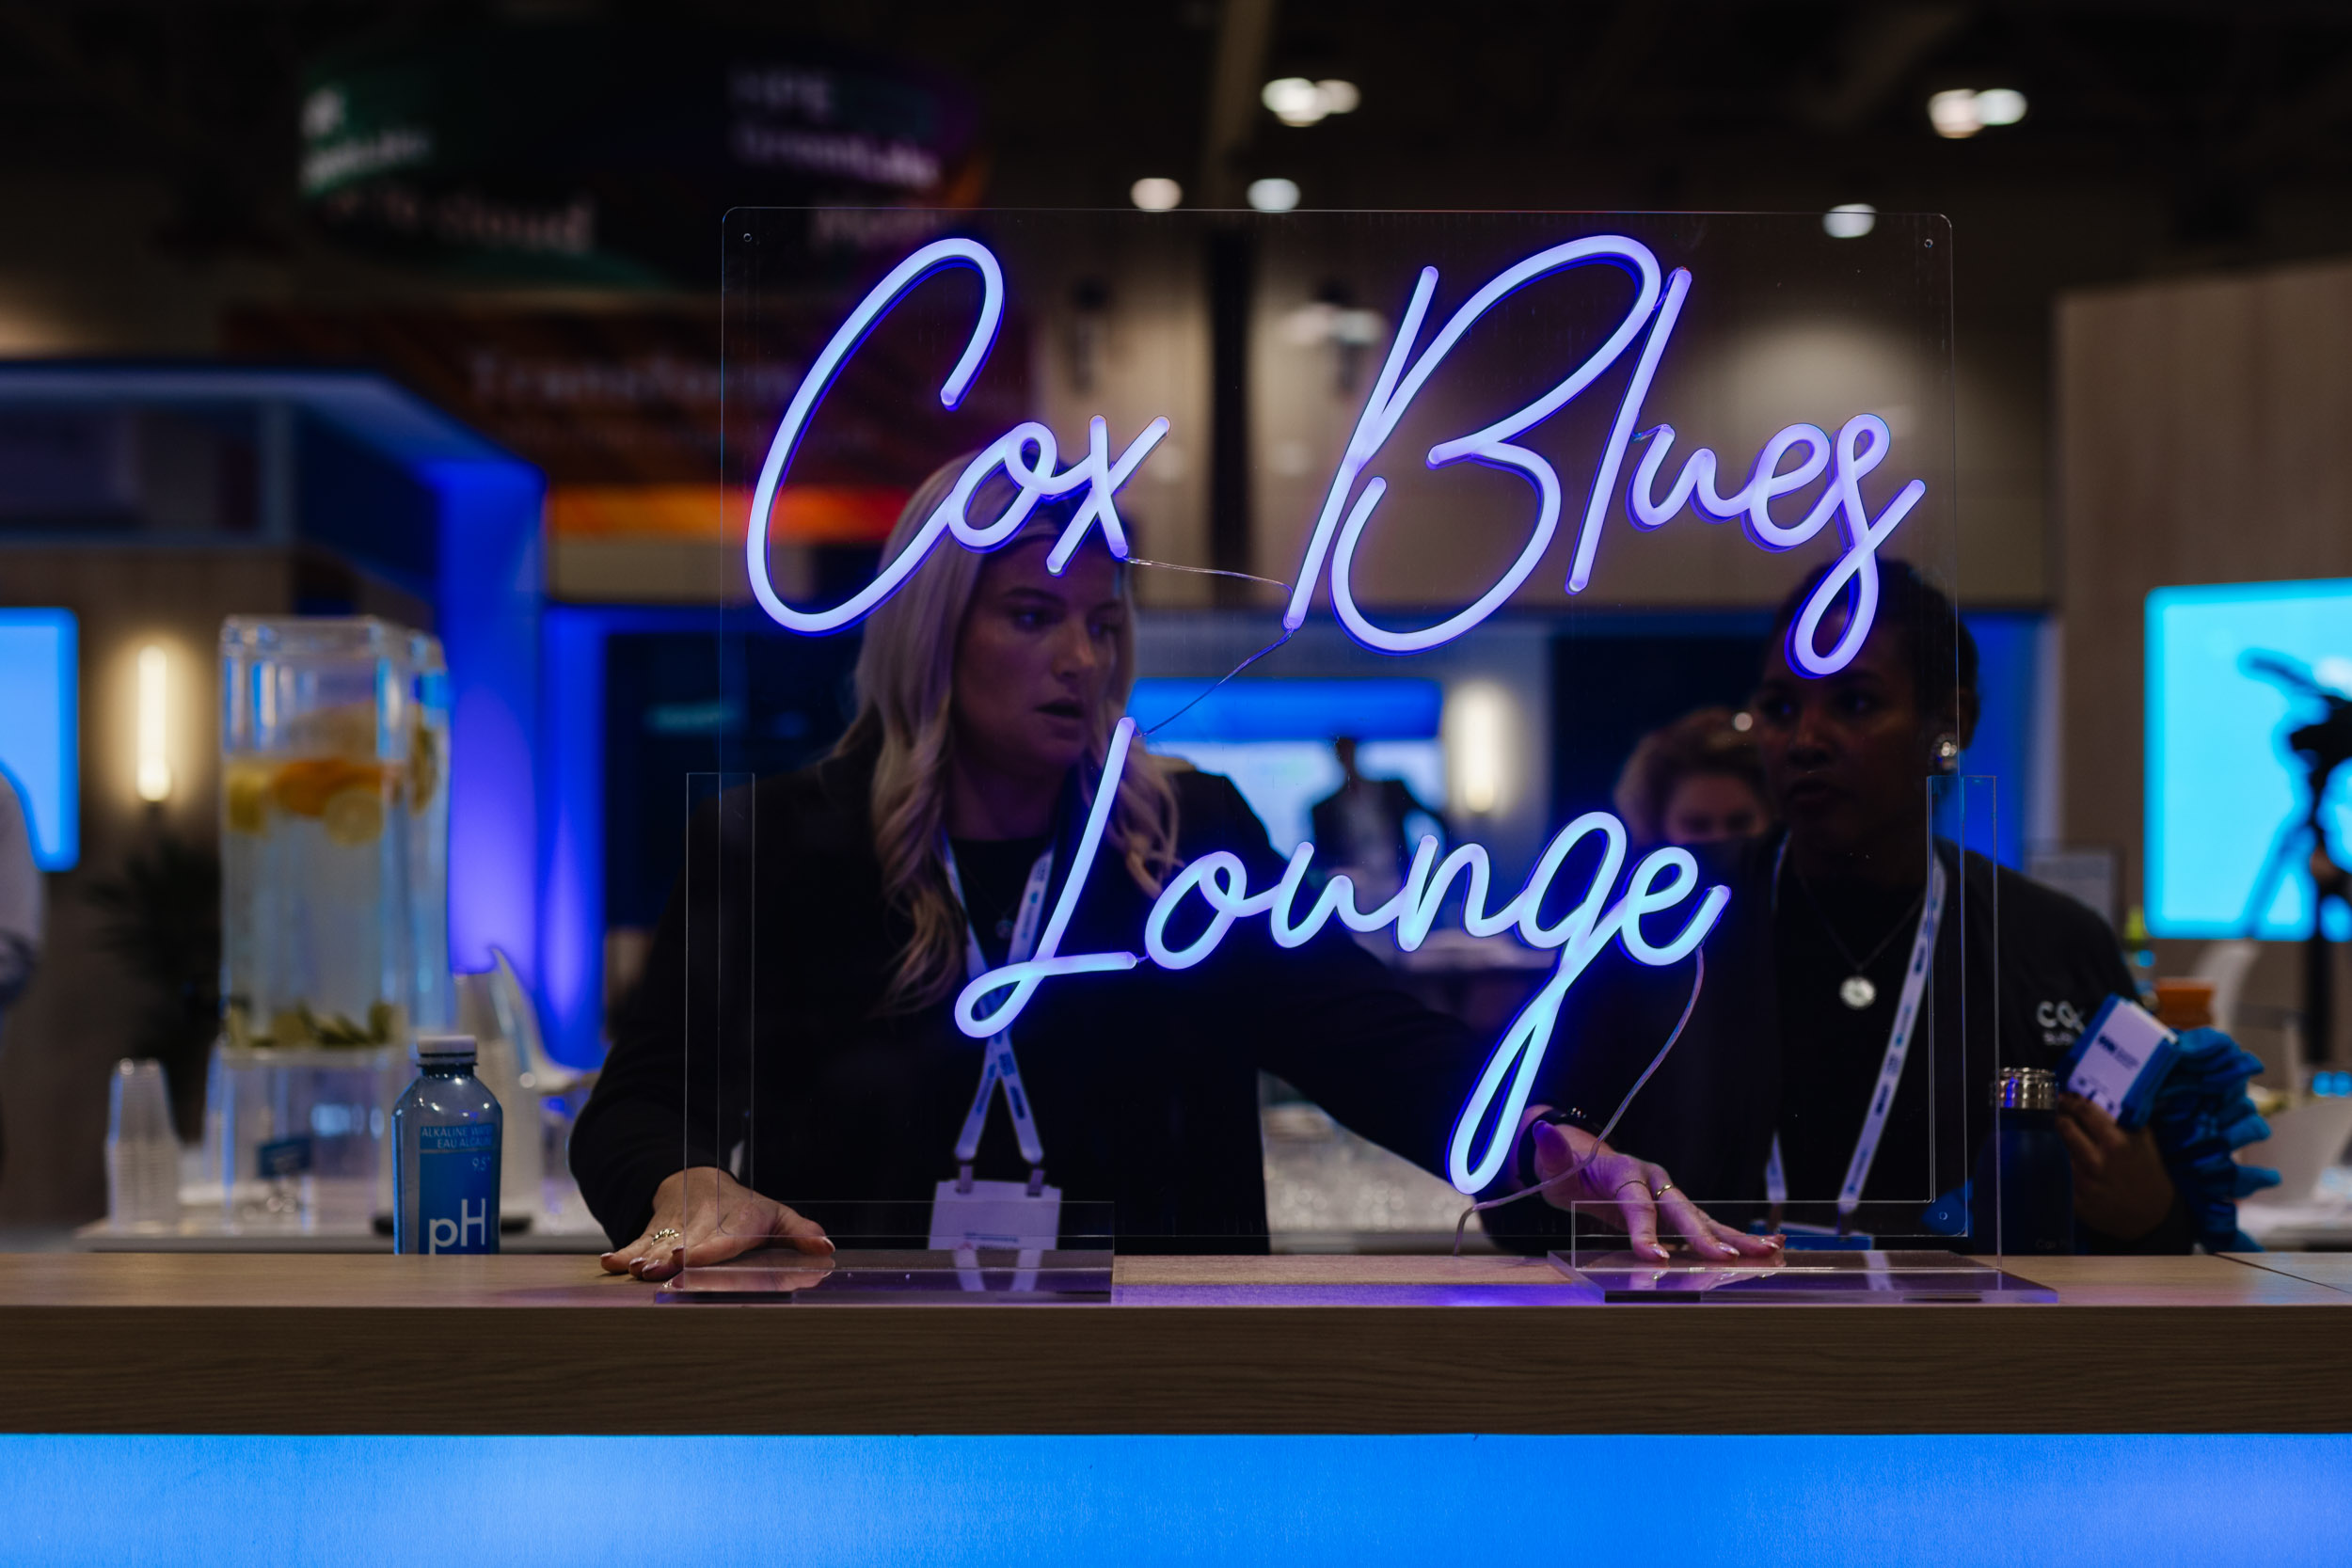 Cox blues lounge at SXSW featuring Toronto trade show photography.